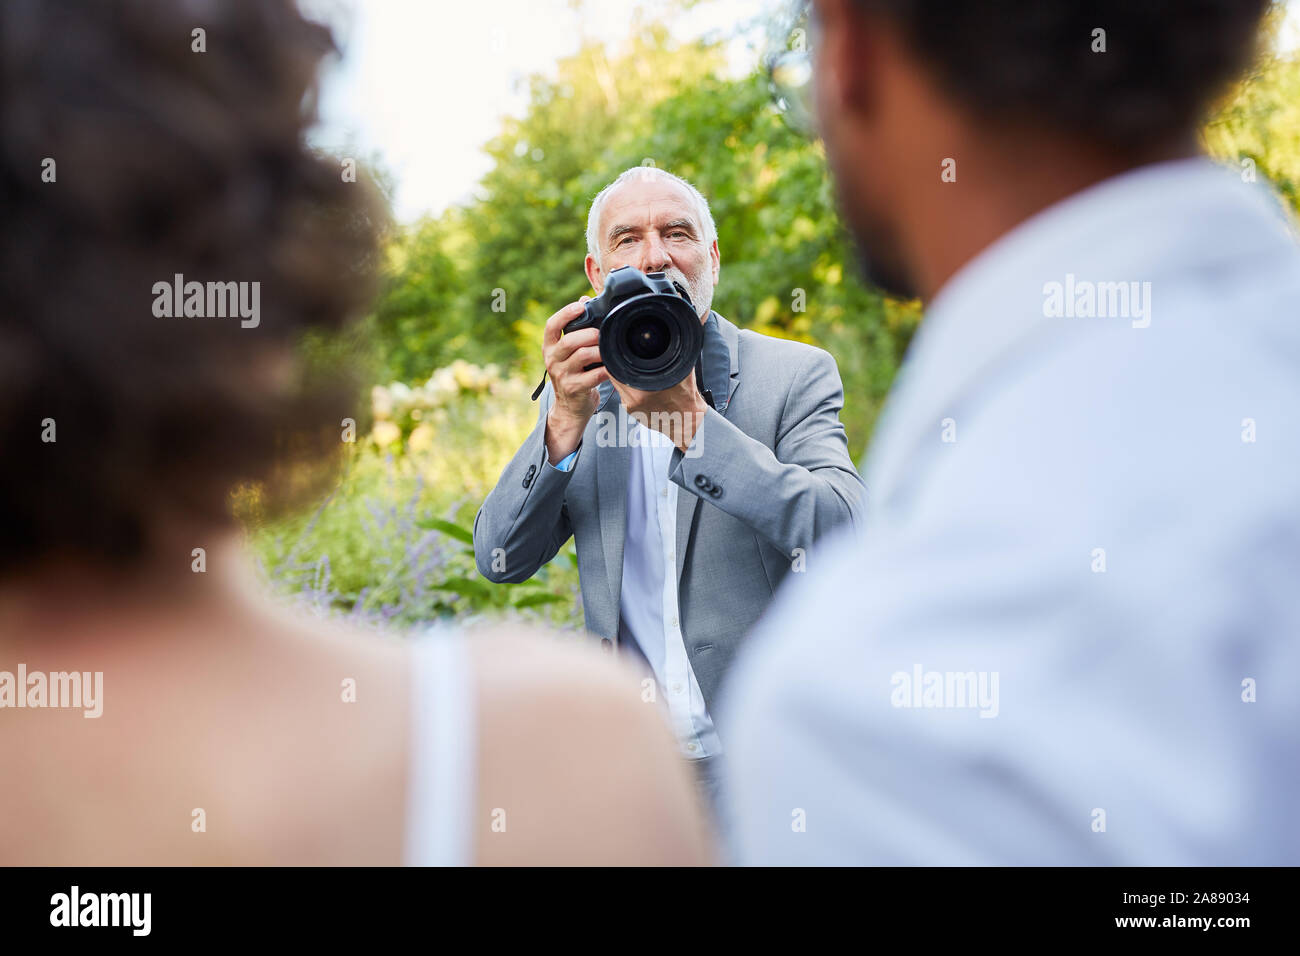 Wedding photographer and newlyweds at the photo shoot in nature Stock Photo